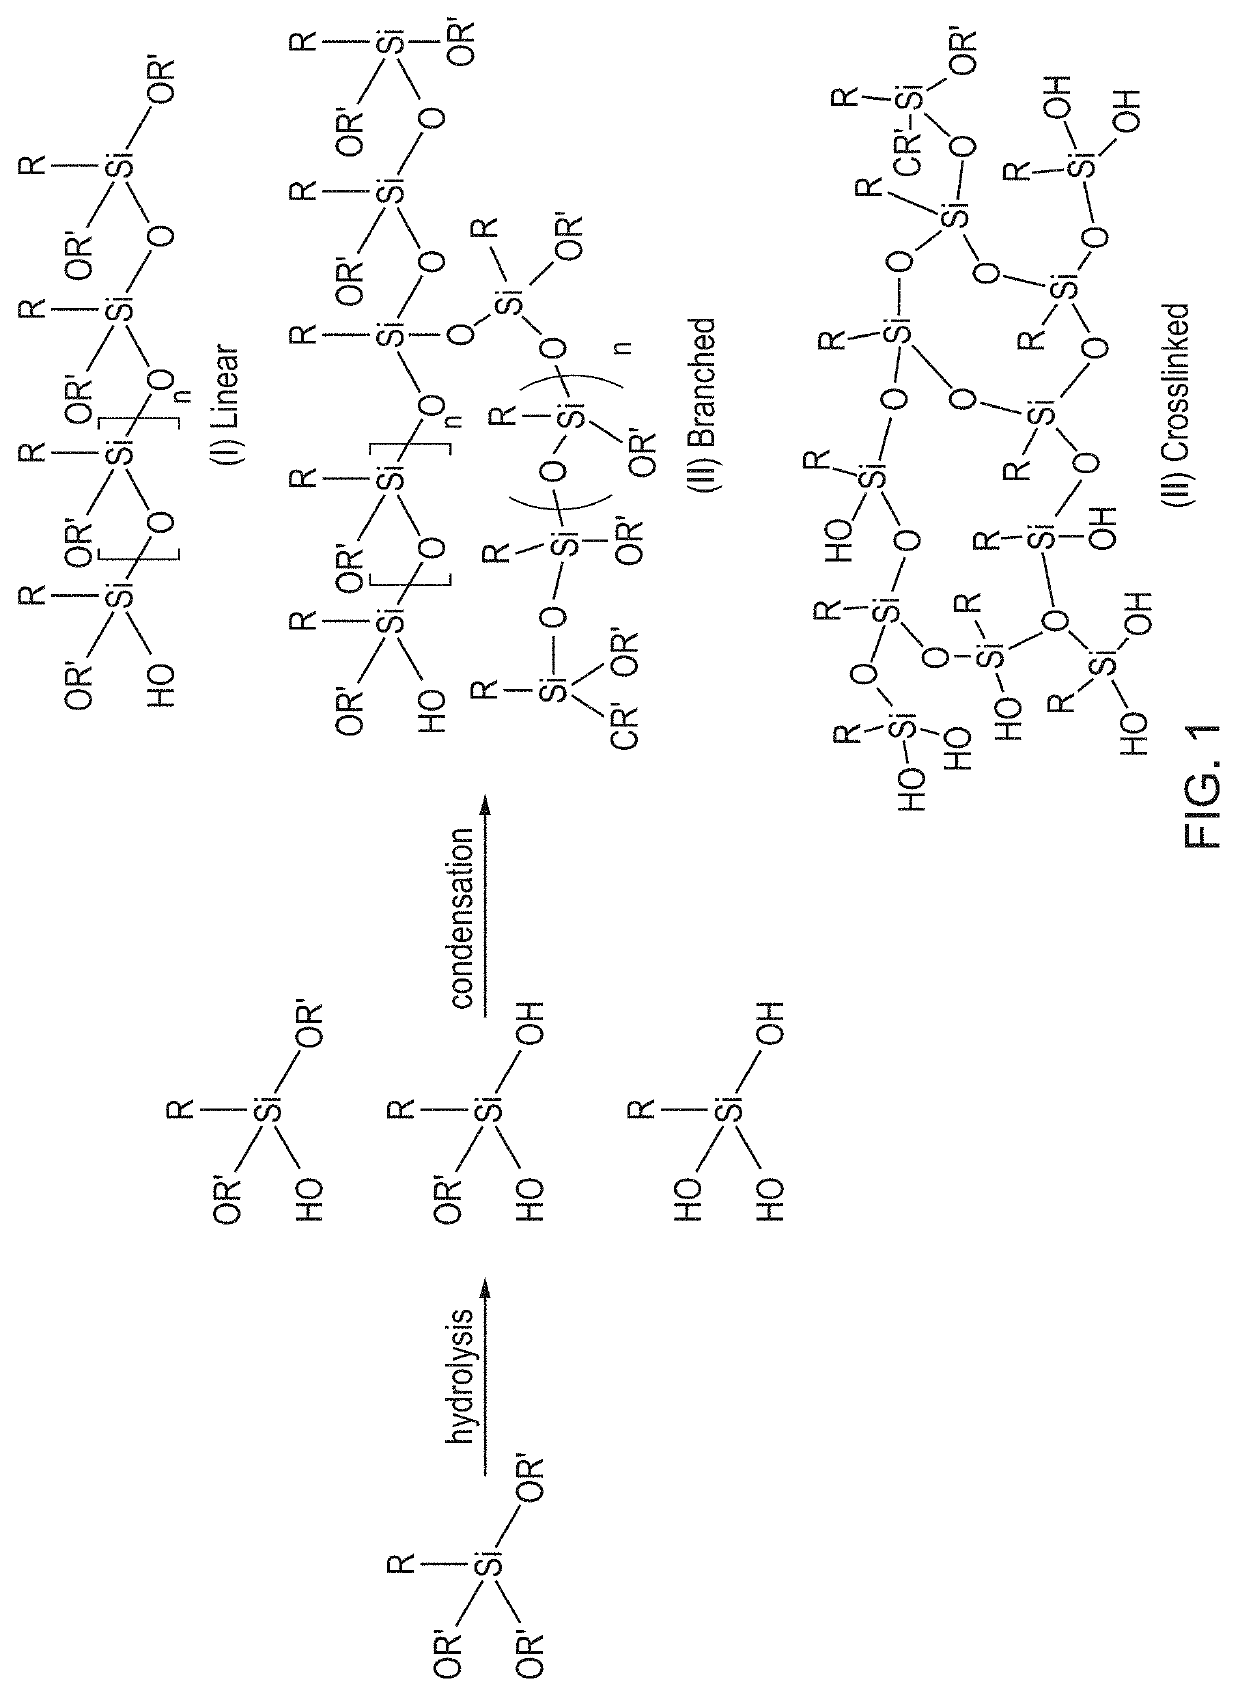 Methods of encapsulating electrical windings in an encapsulant composition